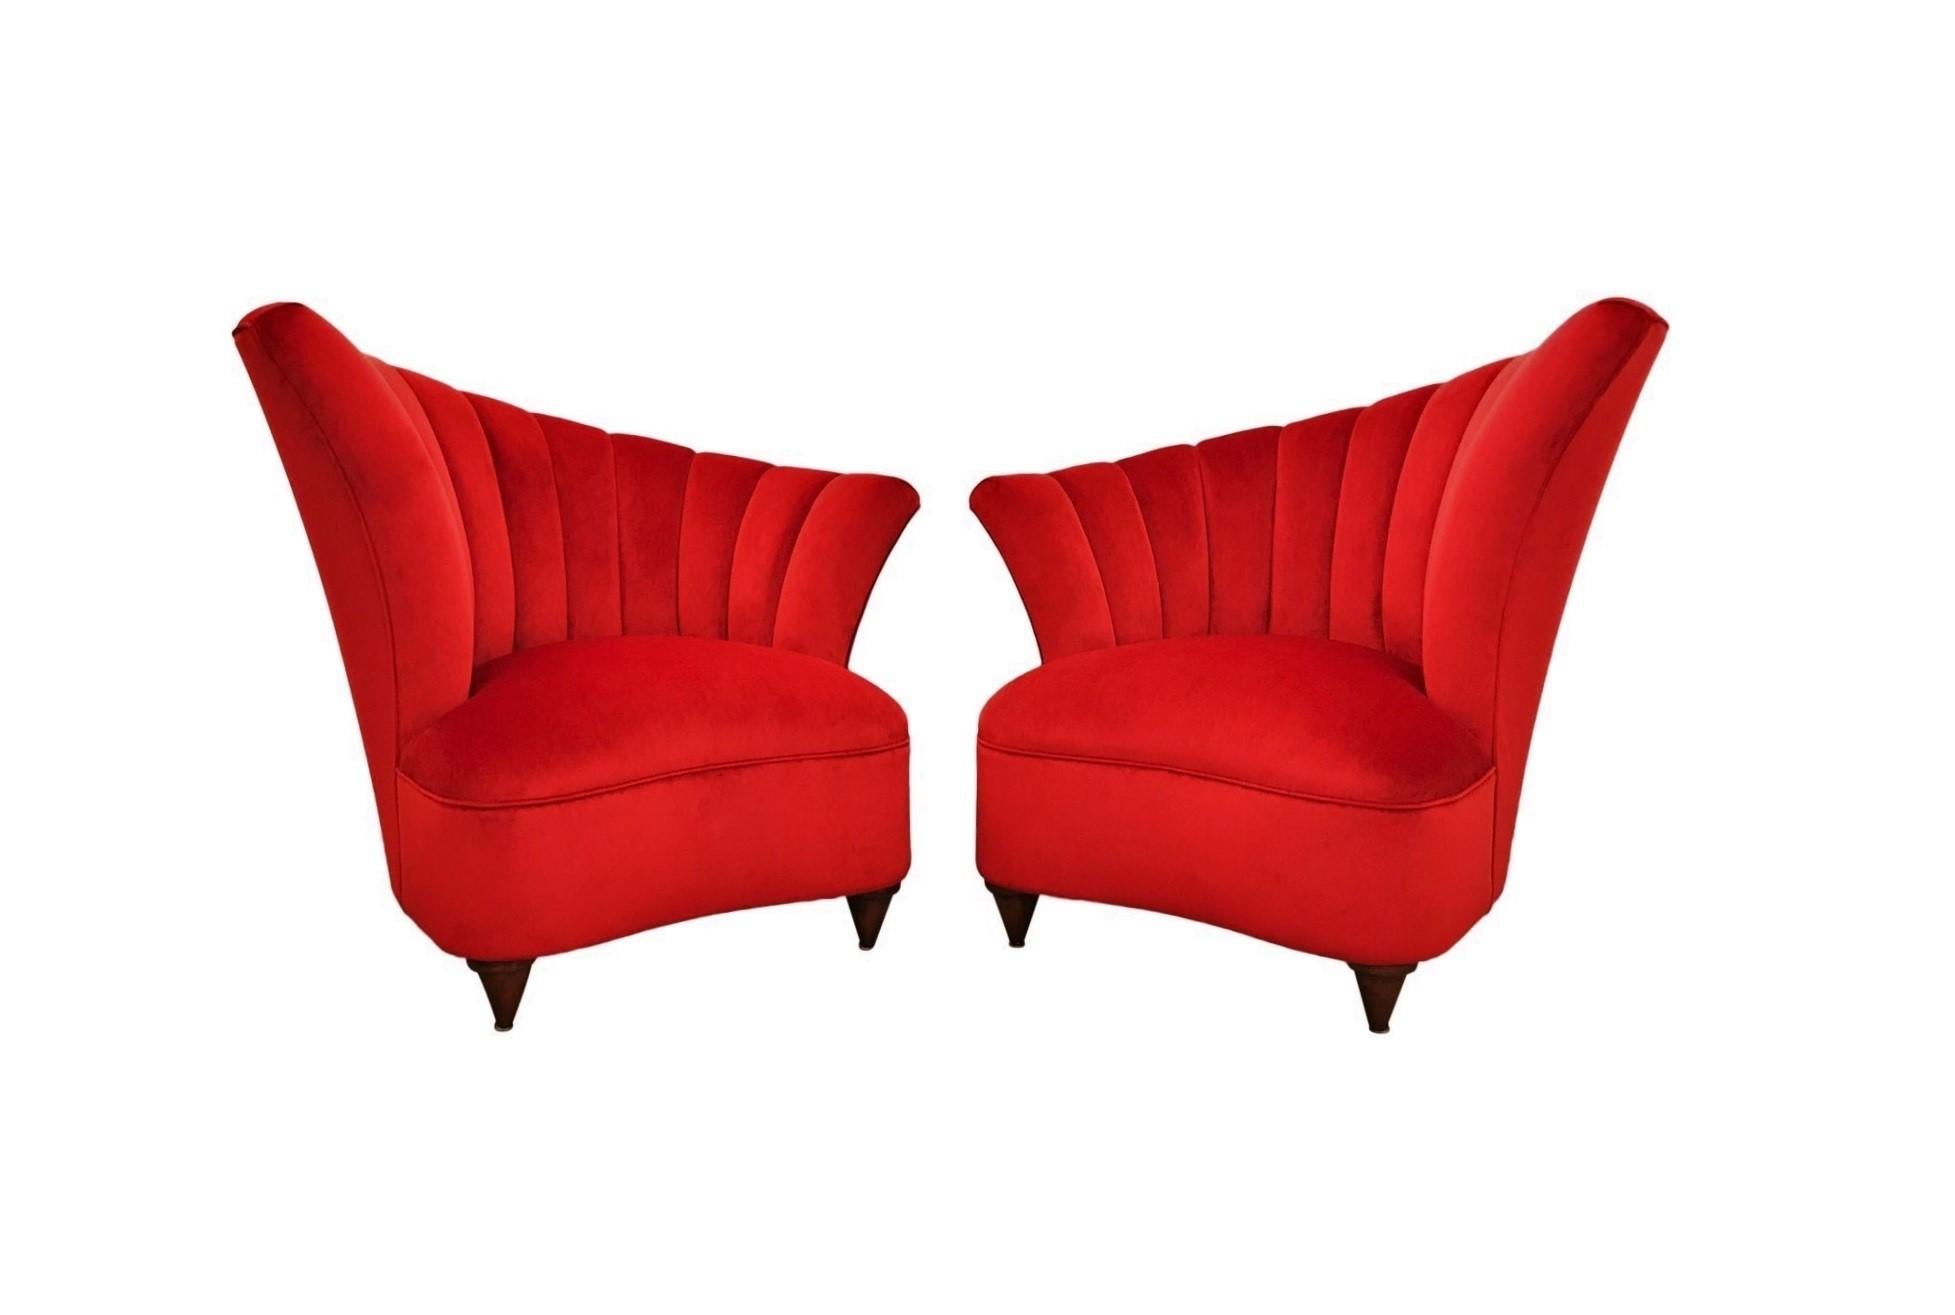 Hollywood Regency Scalloped Asymmetrical Red Velvet Chairs In Excellent Condition For Sale In Dallas, TX